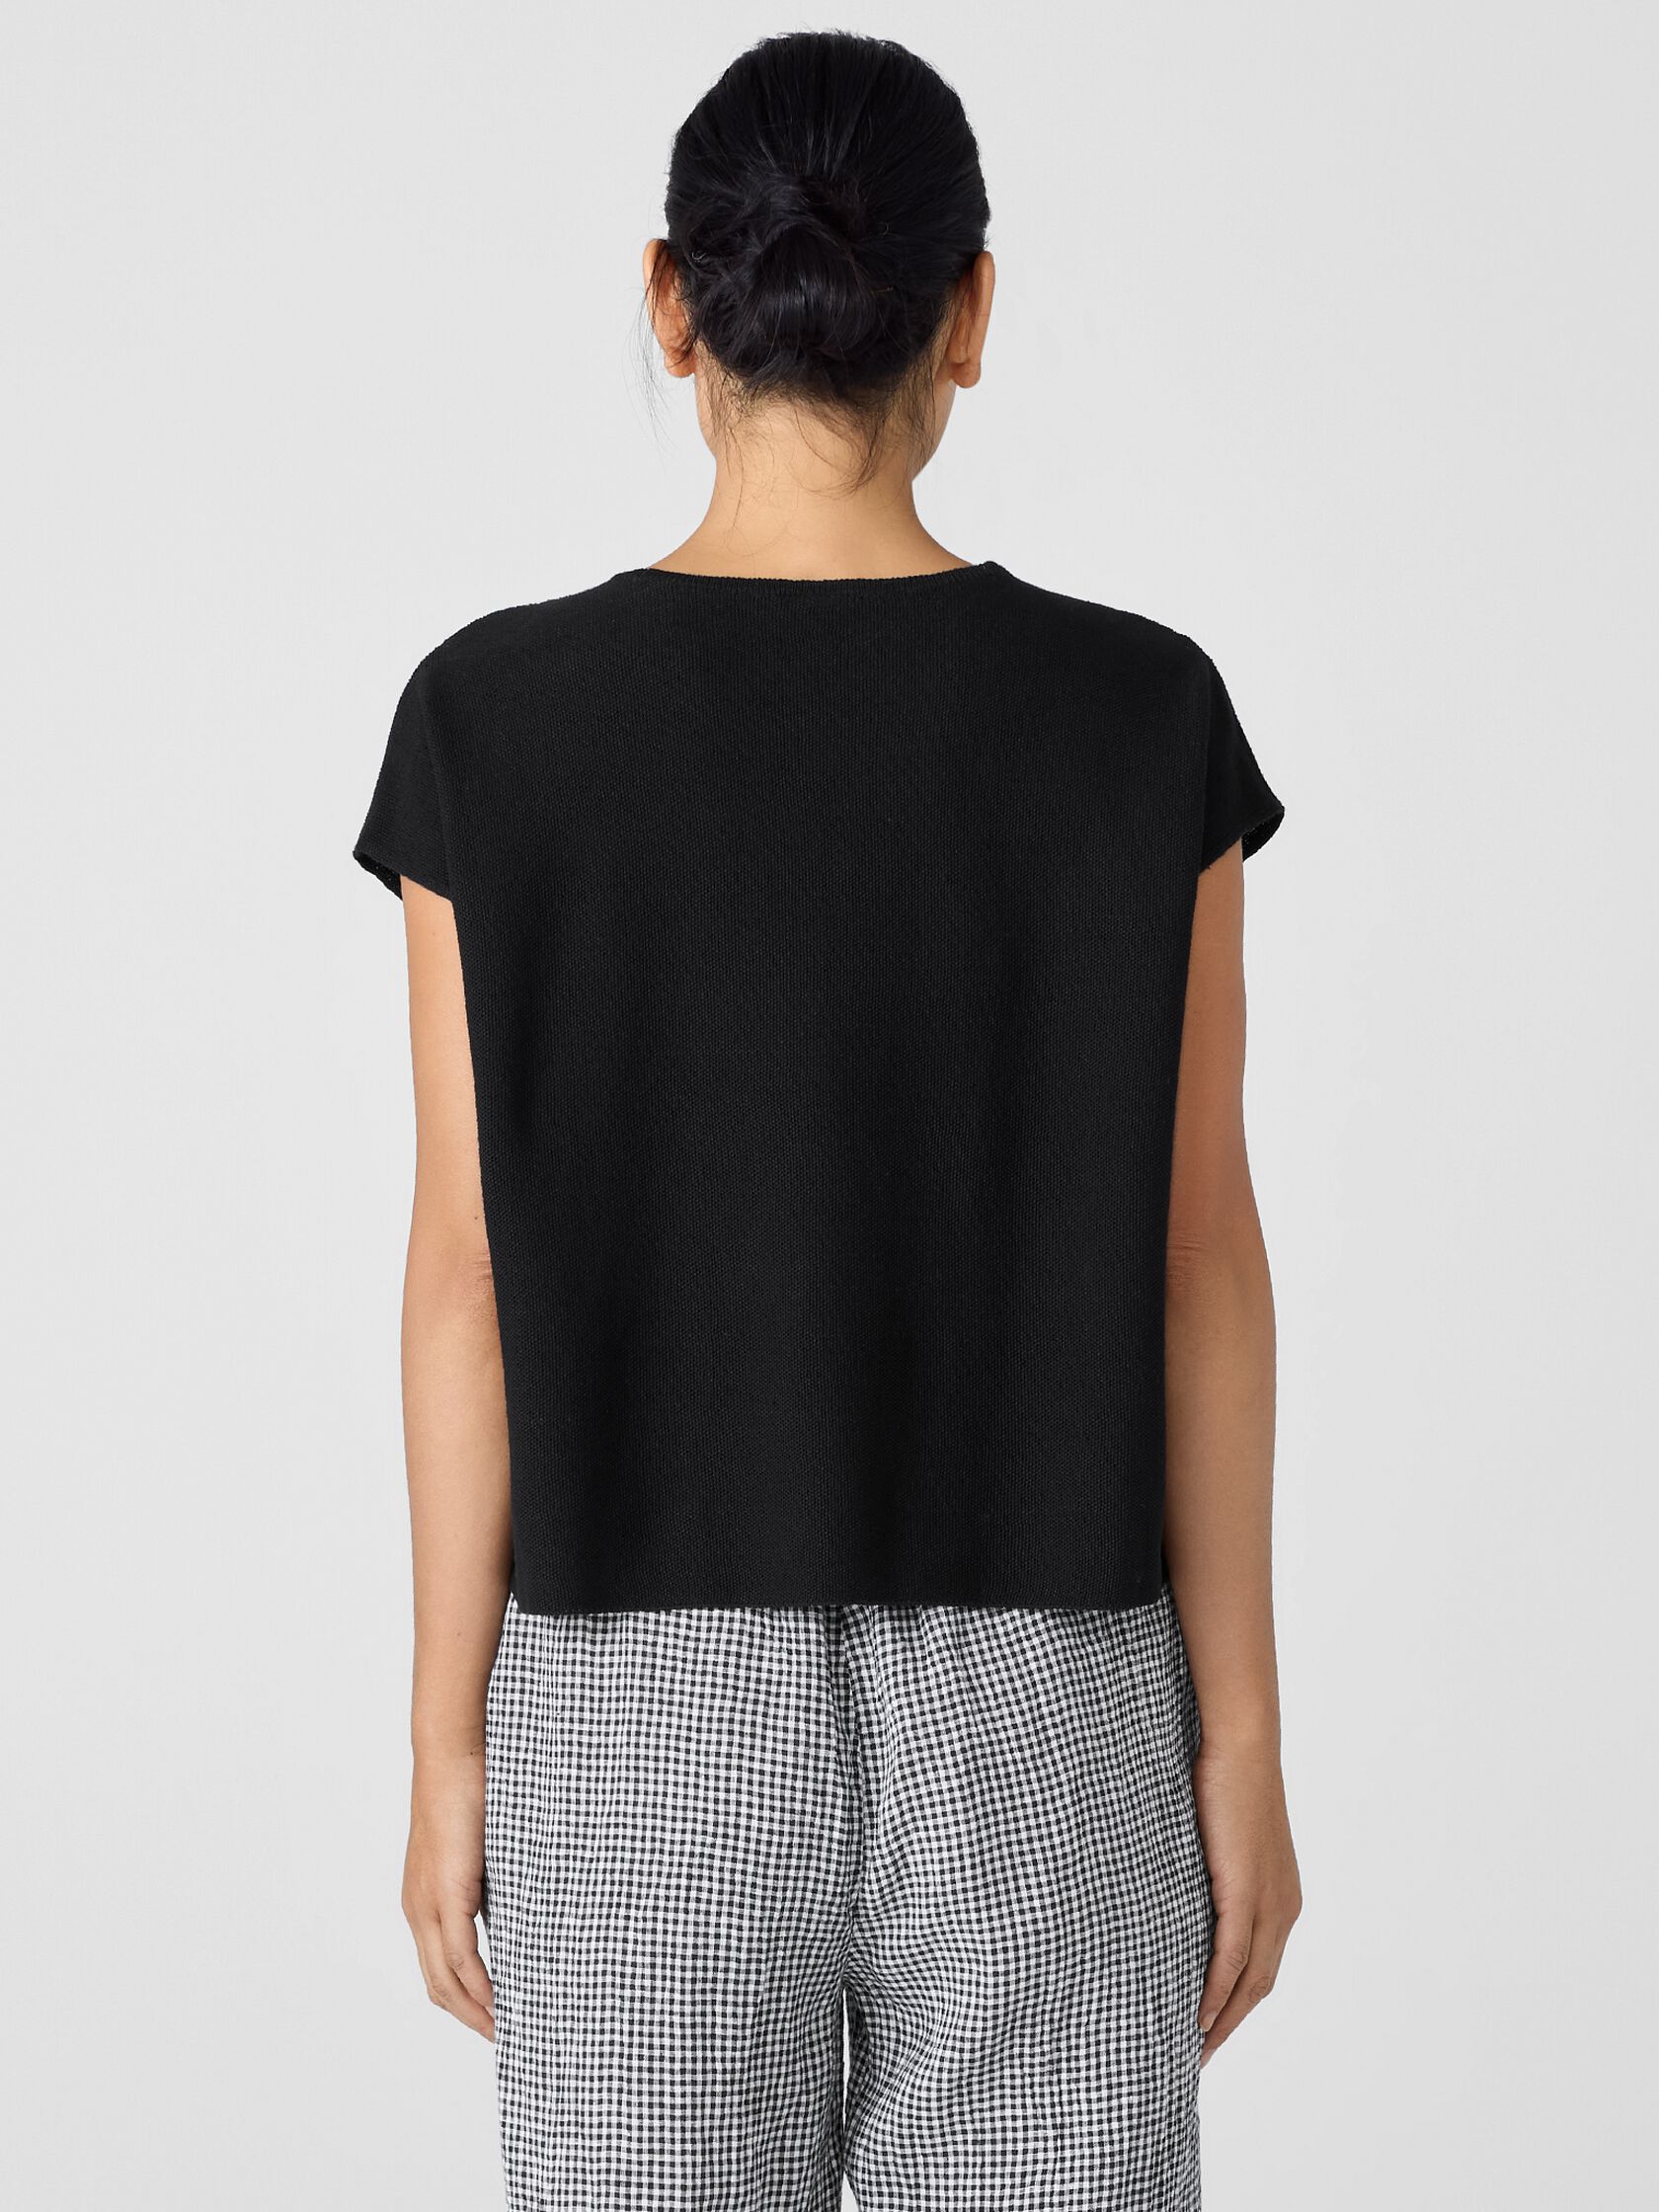 Organic Linen Cotton Square Top | EILEEN FISHER